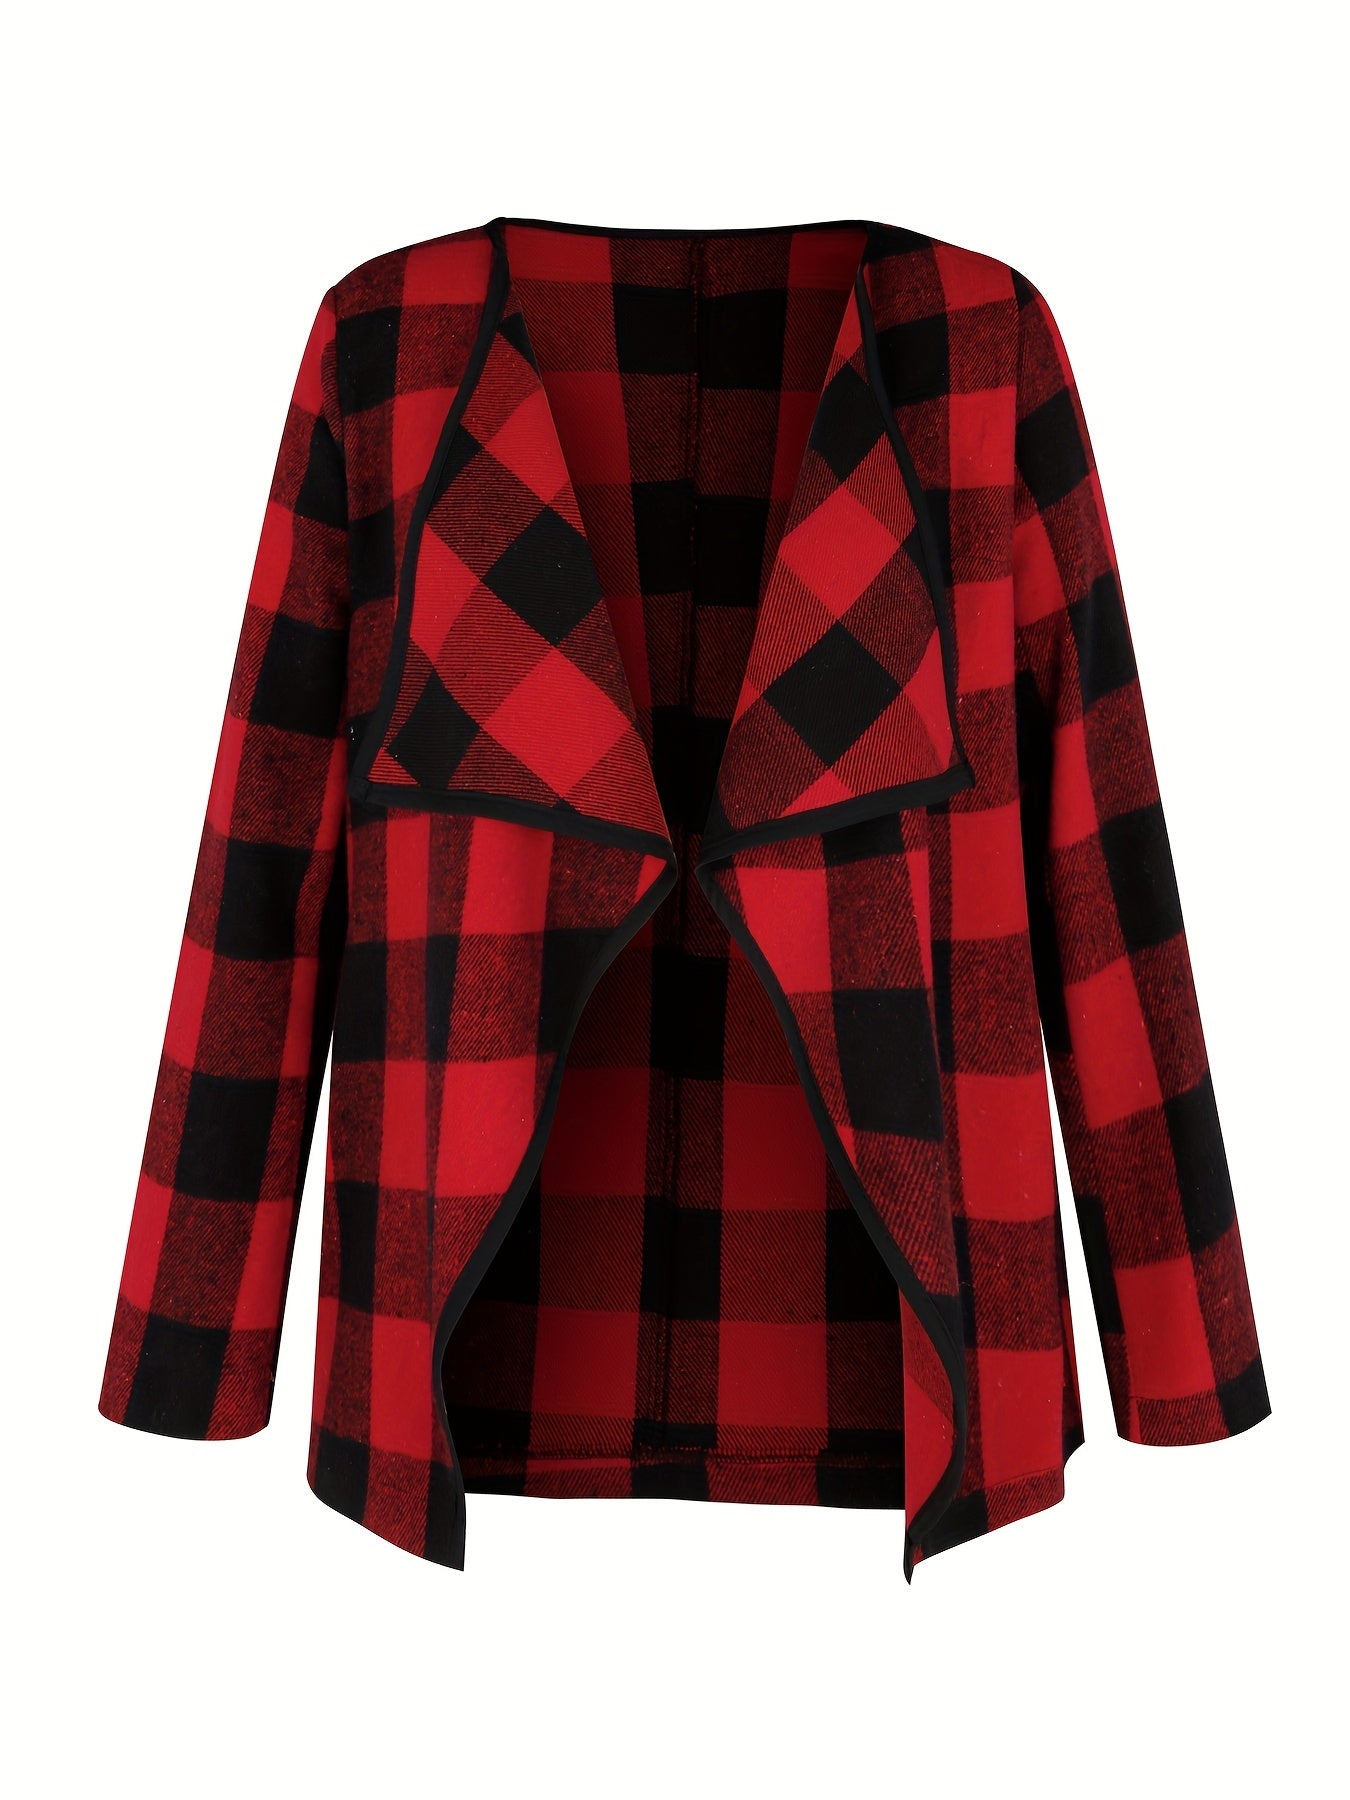 Plaid Print Open Front Jacket, Versatile Long Sleeve Lapel Jacket For Spring & Fall, Women's Clothing